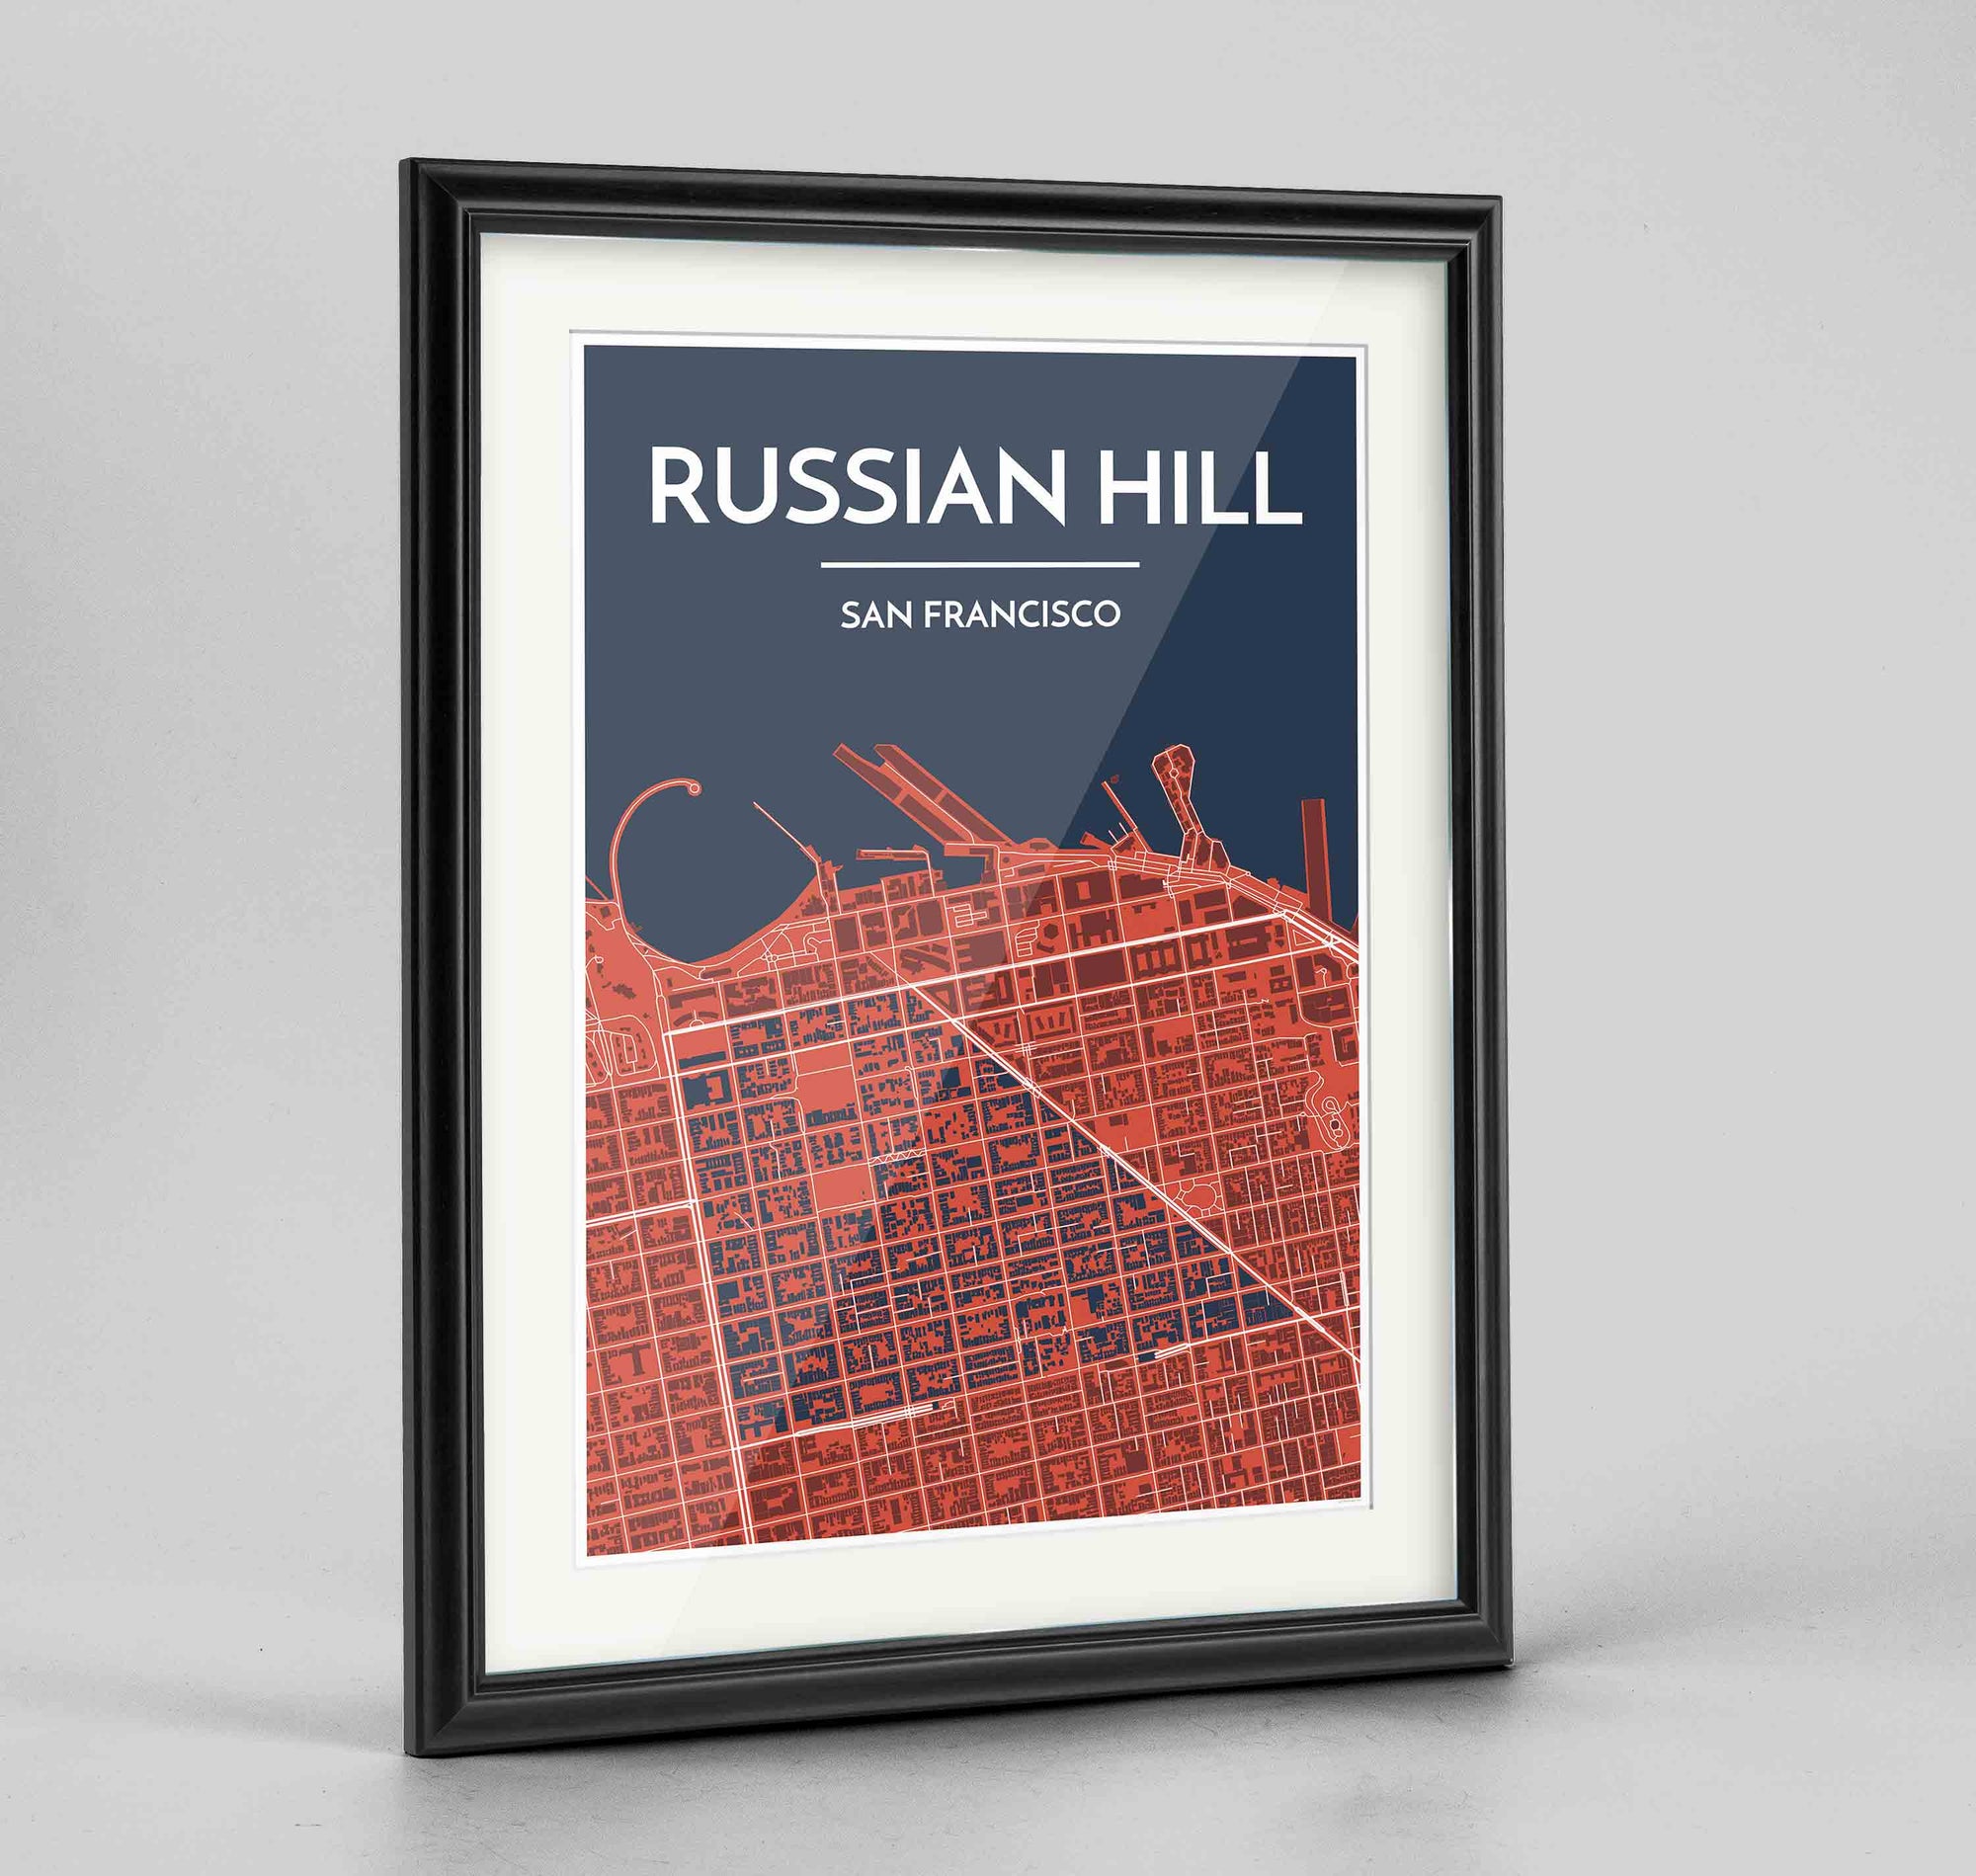 Framed Russian Hill San Francisco Map Art Print 24x36" Traditional Black frame Point Two Design Group